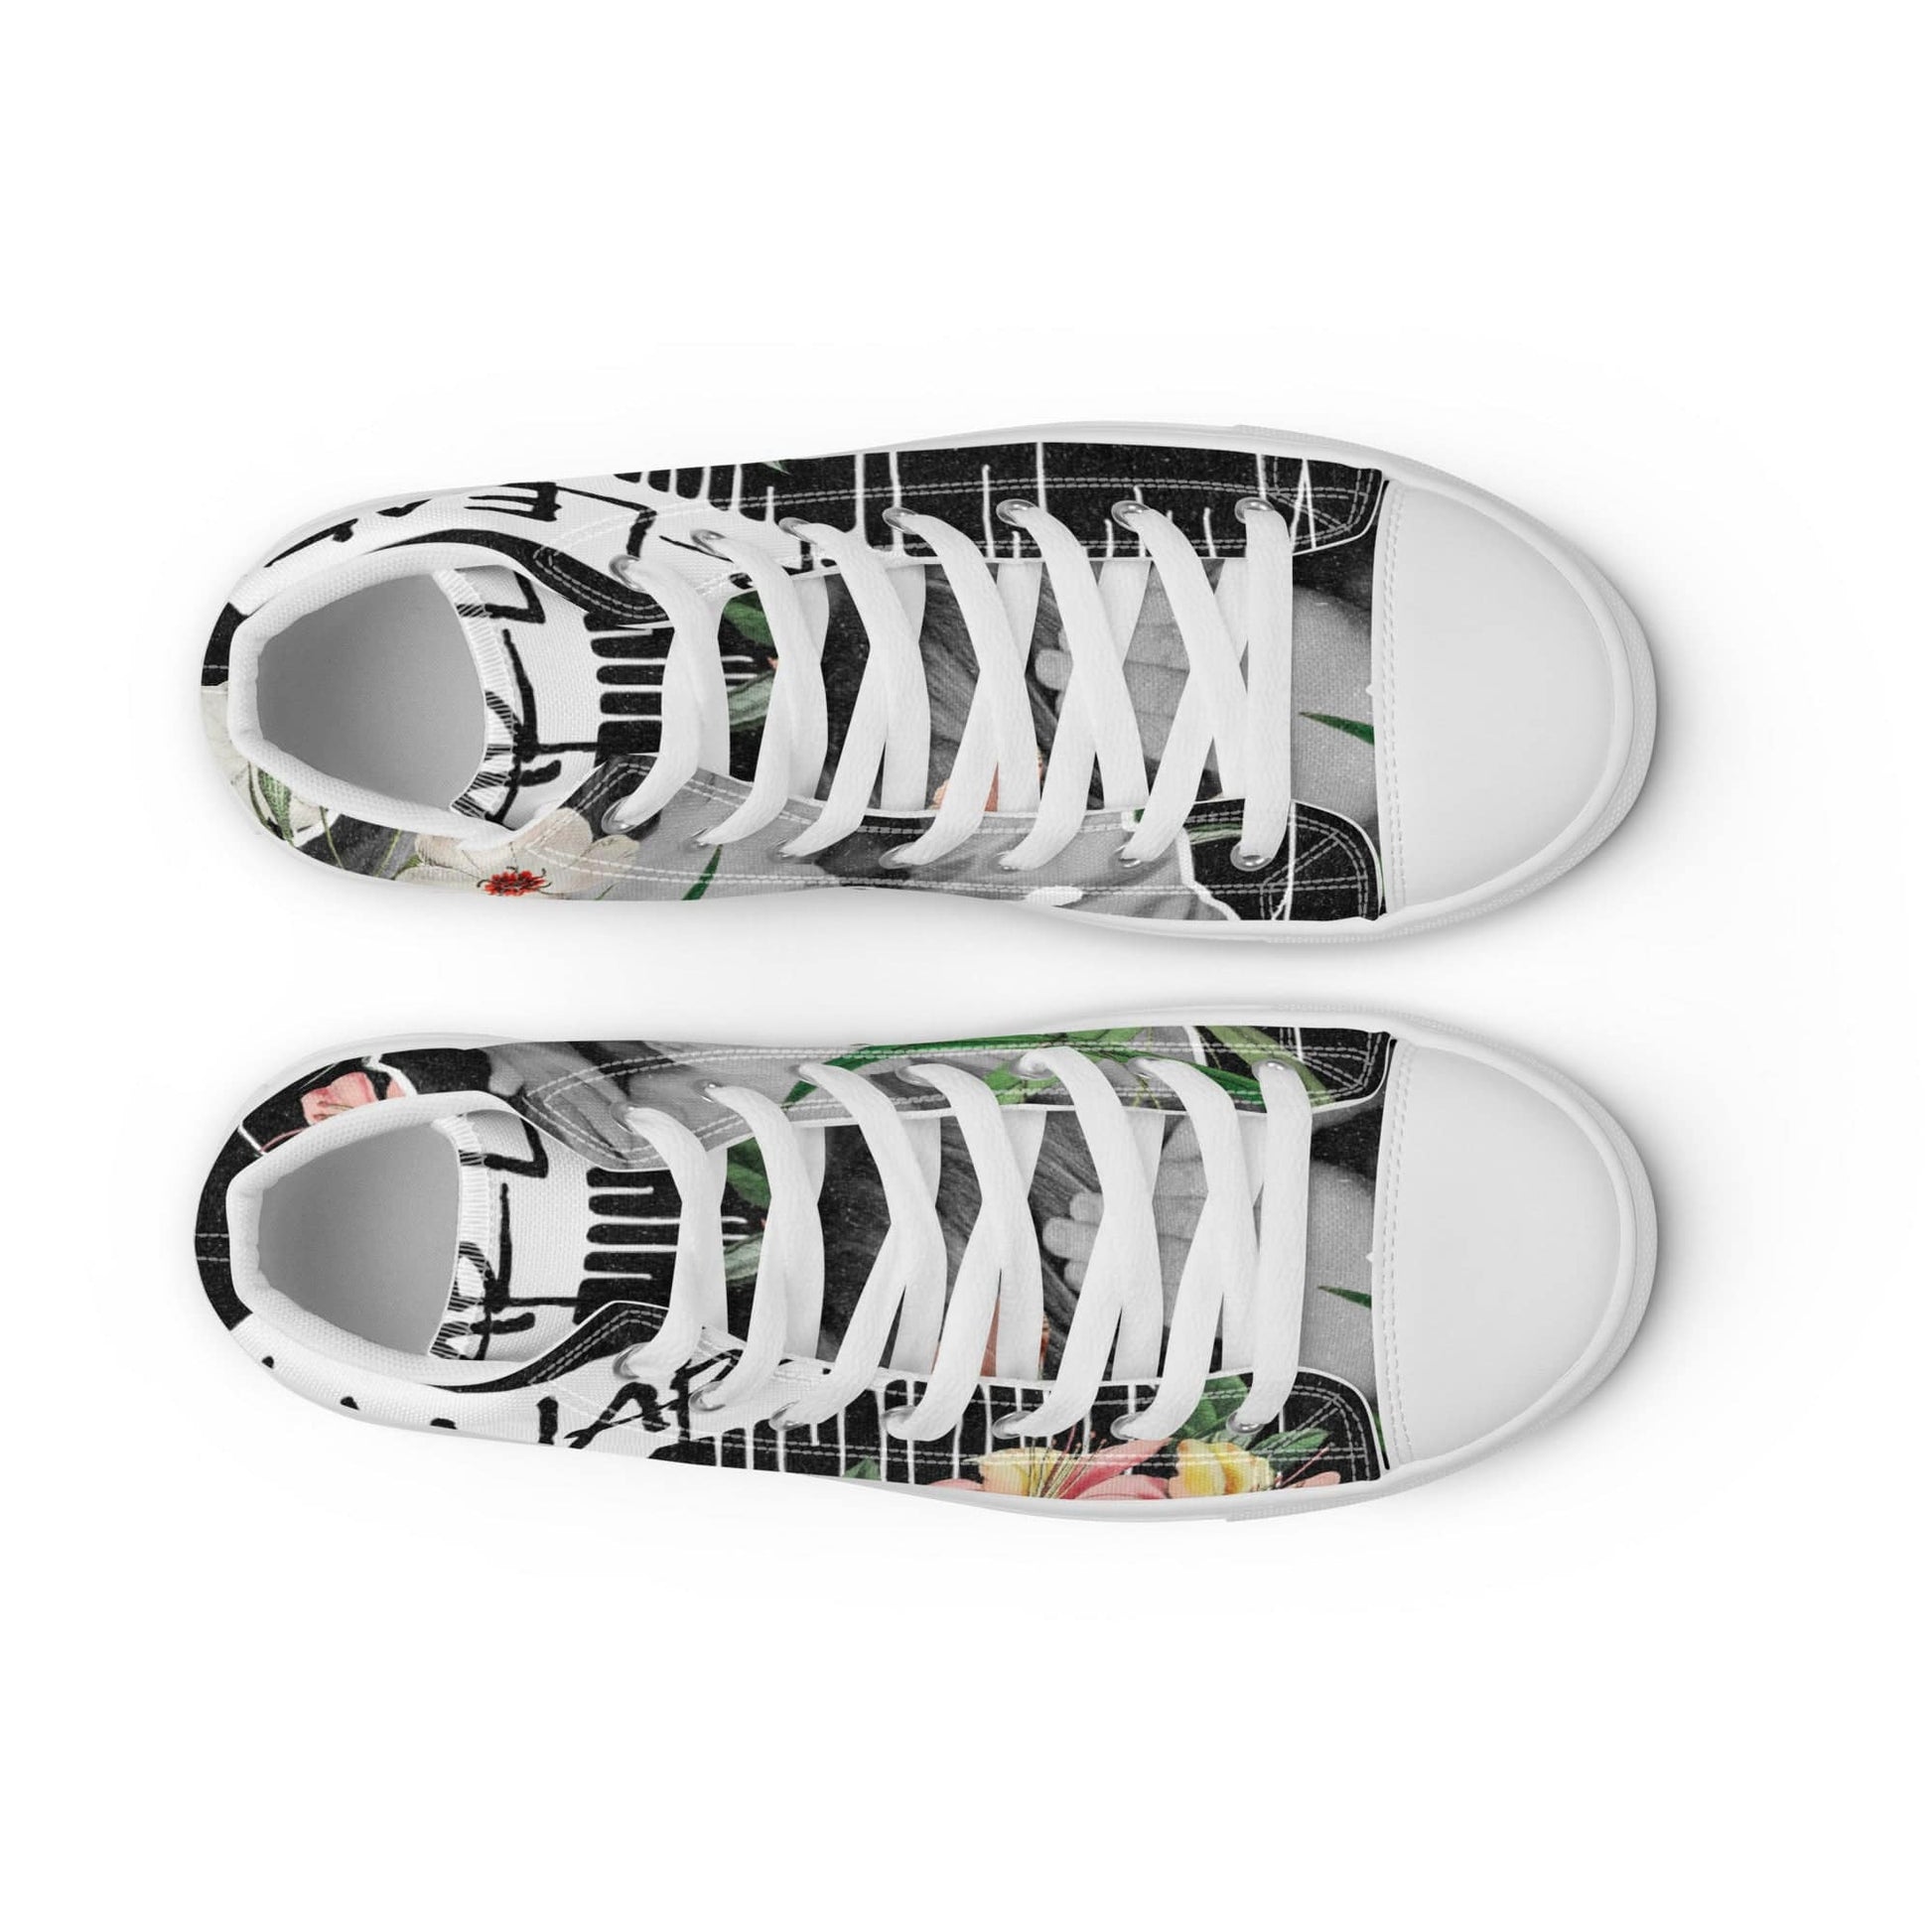 Men’s High Top Canvas Shoes - Cry Baby - Lunar Leaf